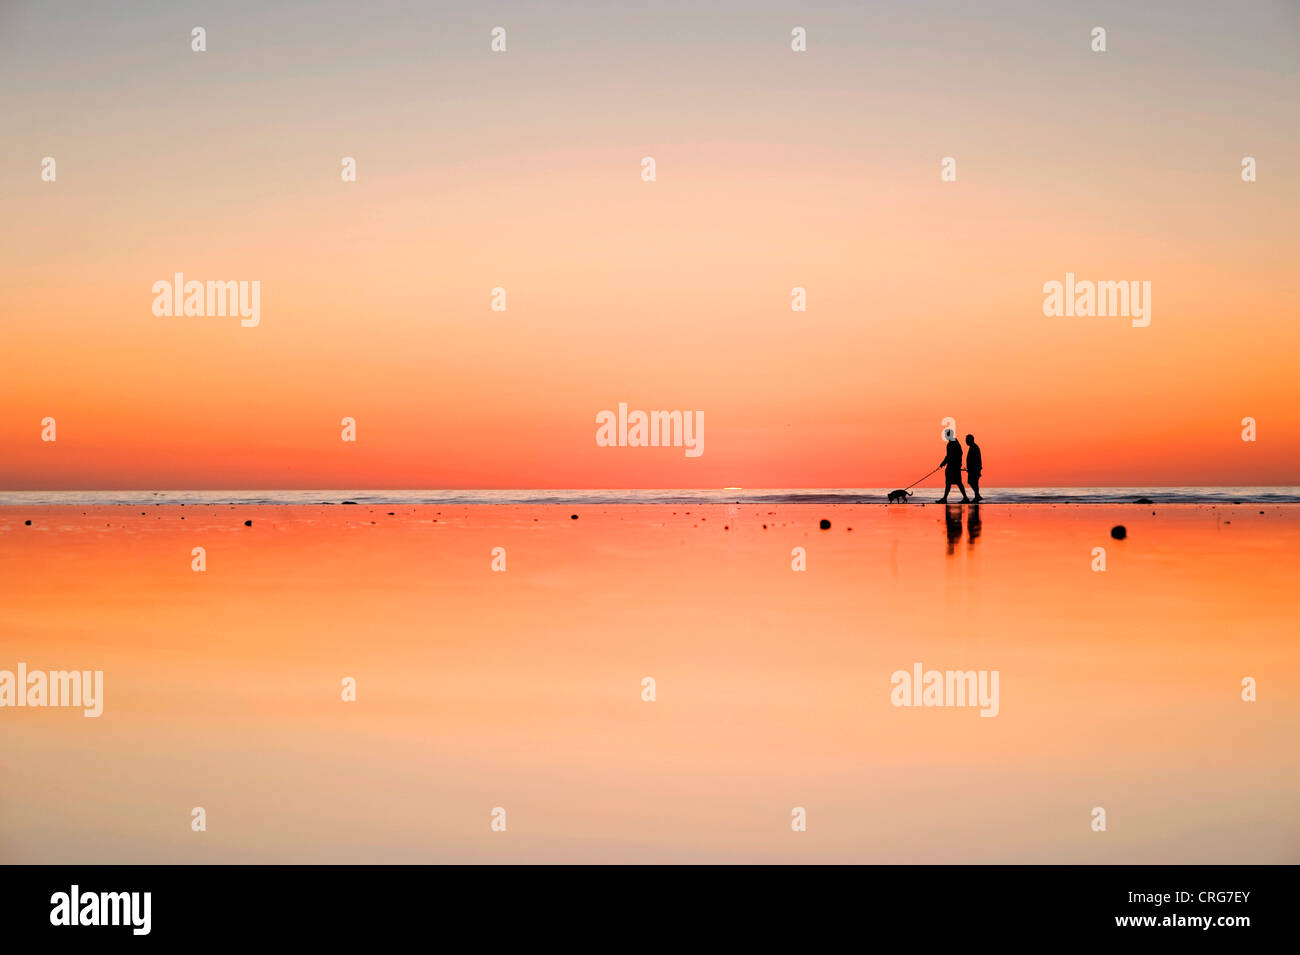 Silhouetted figures walk their dog on wet sand beside the ocean at sunset. Stock Photo